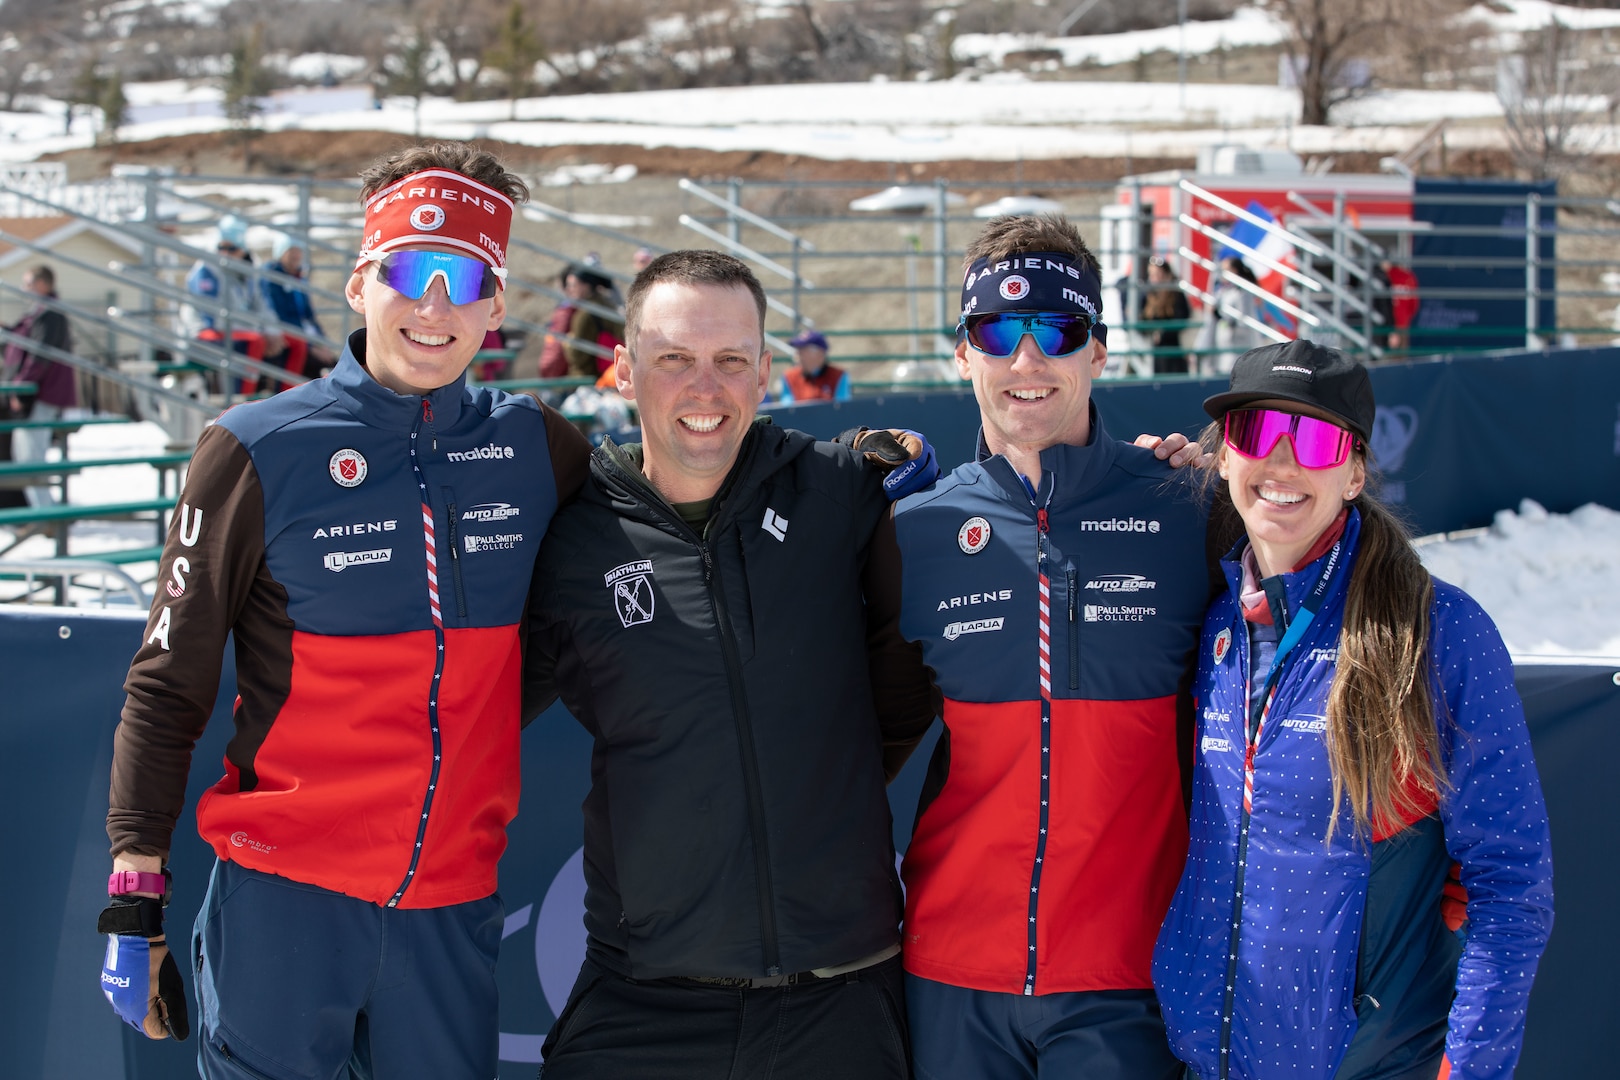 The National Guard Biathlon team poses for a photo after the final race during the International Biathlon Union World Cup at Soldier Hollow in Utah March 10, 2024. The Soldier-athletes all qualified for Sunday's pursuit races.